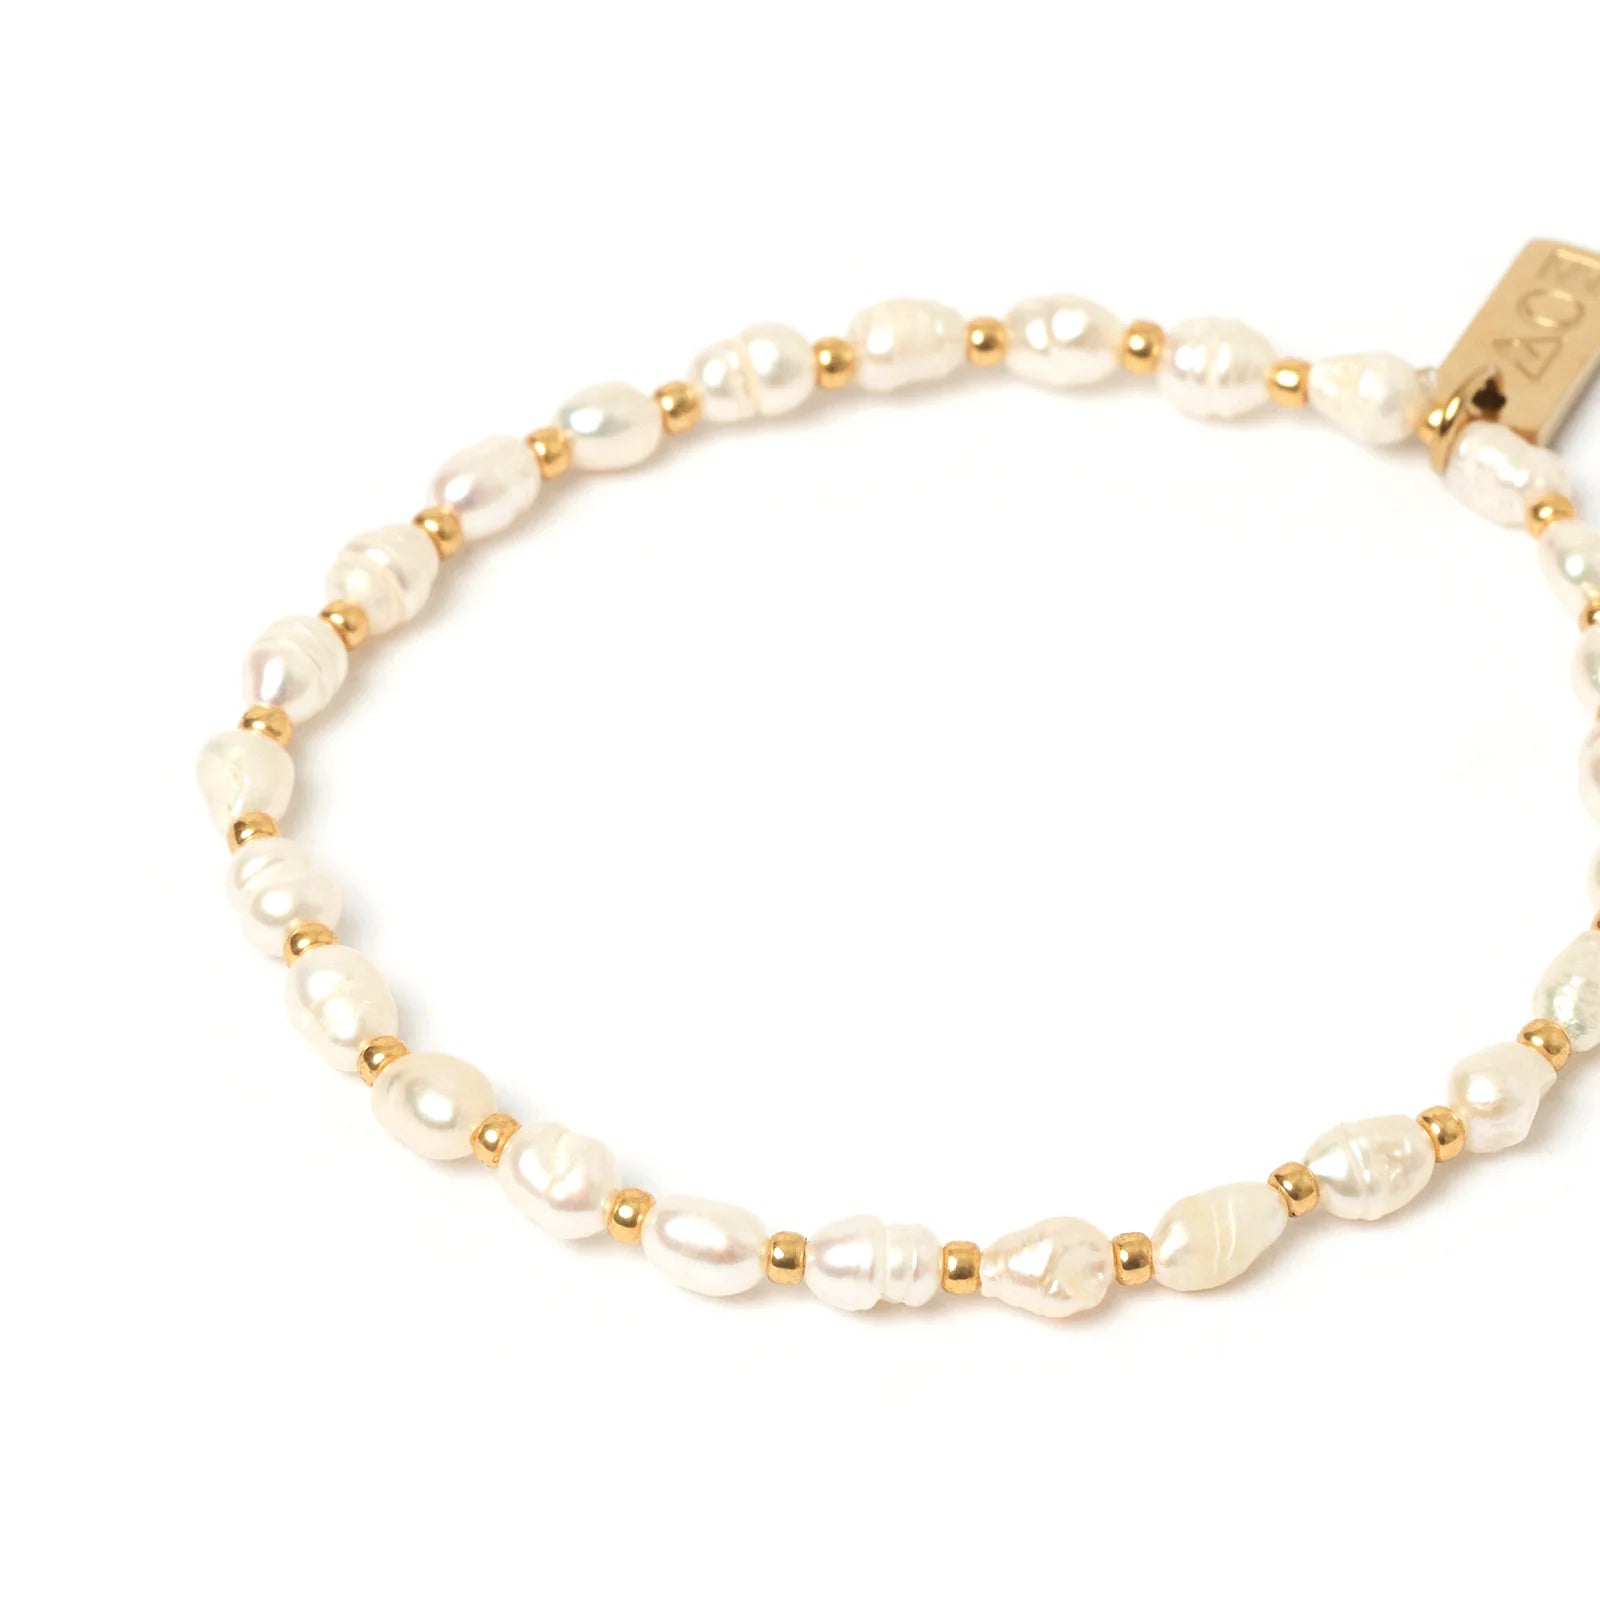 Shop Amber Pearl and Gold Bracelet - Arms Of Eve